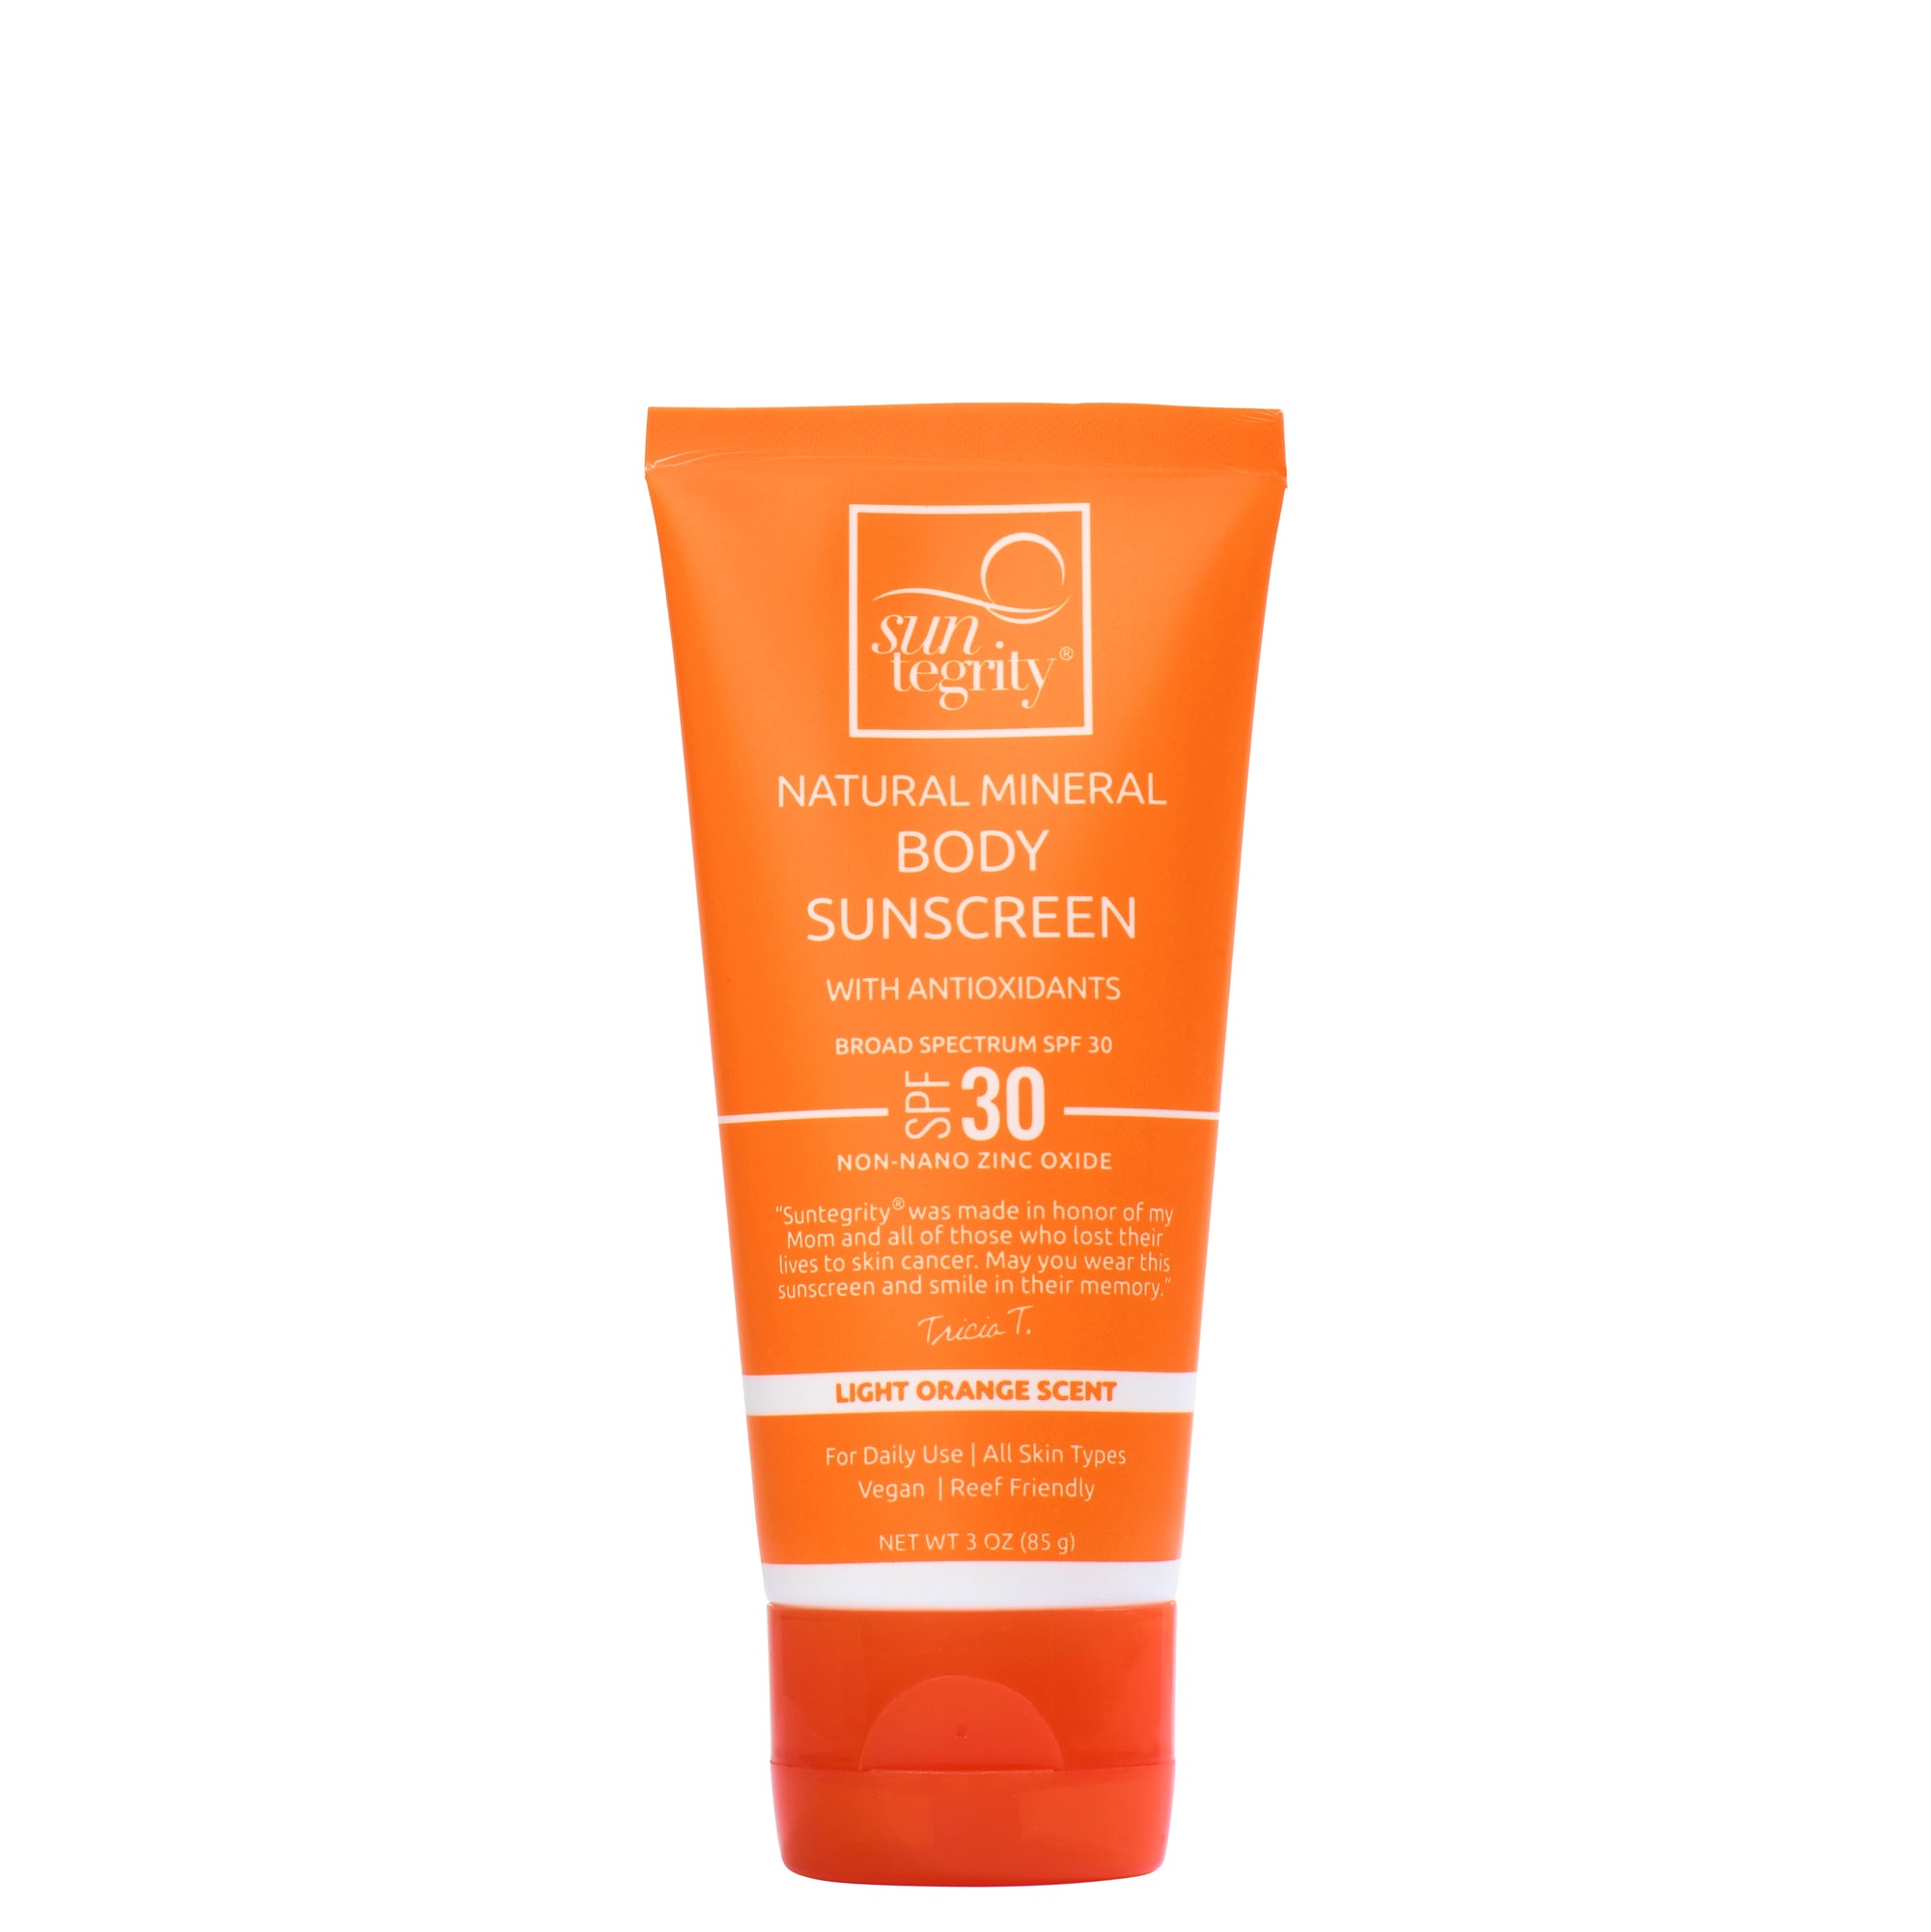 Natural Mineral Sunscreen for Body - Broad Spectrum SPF 30 - 3oz